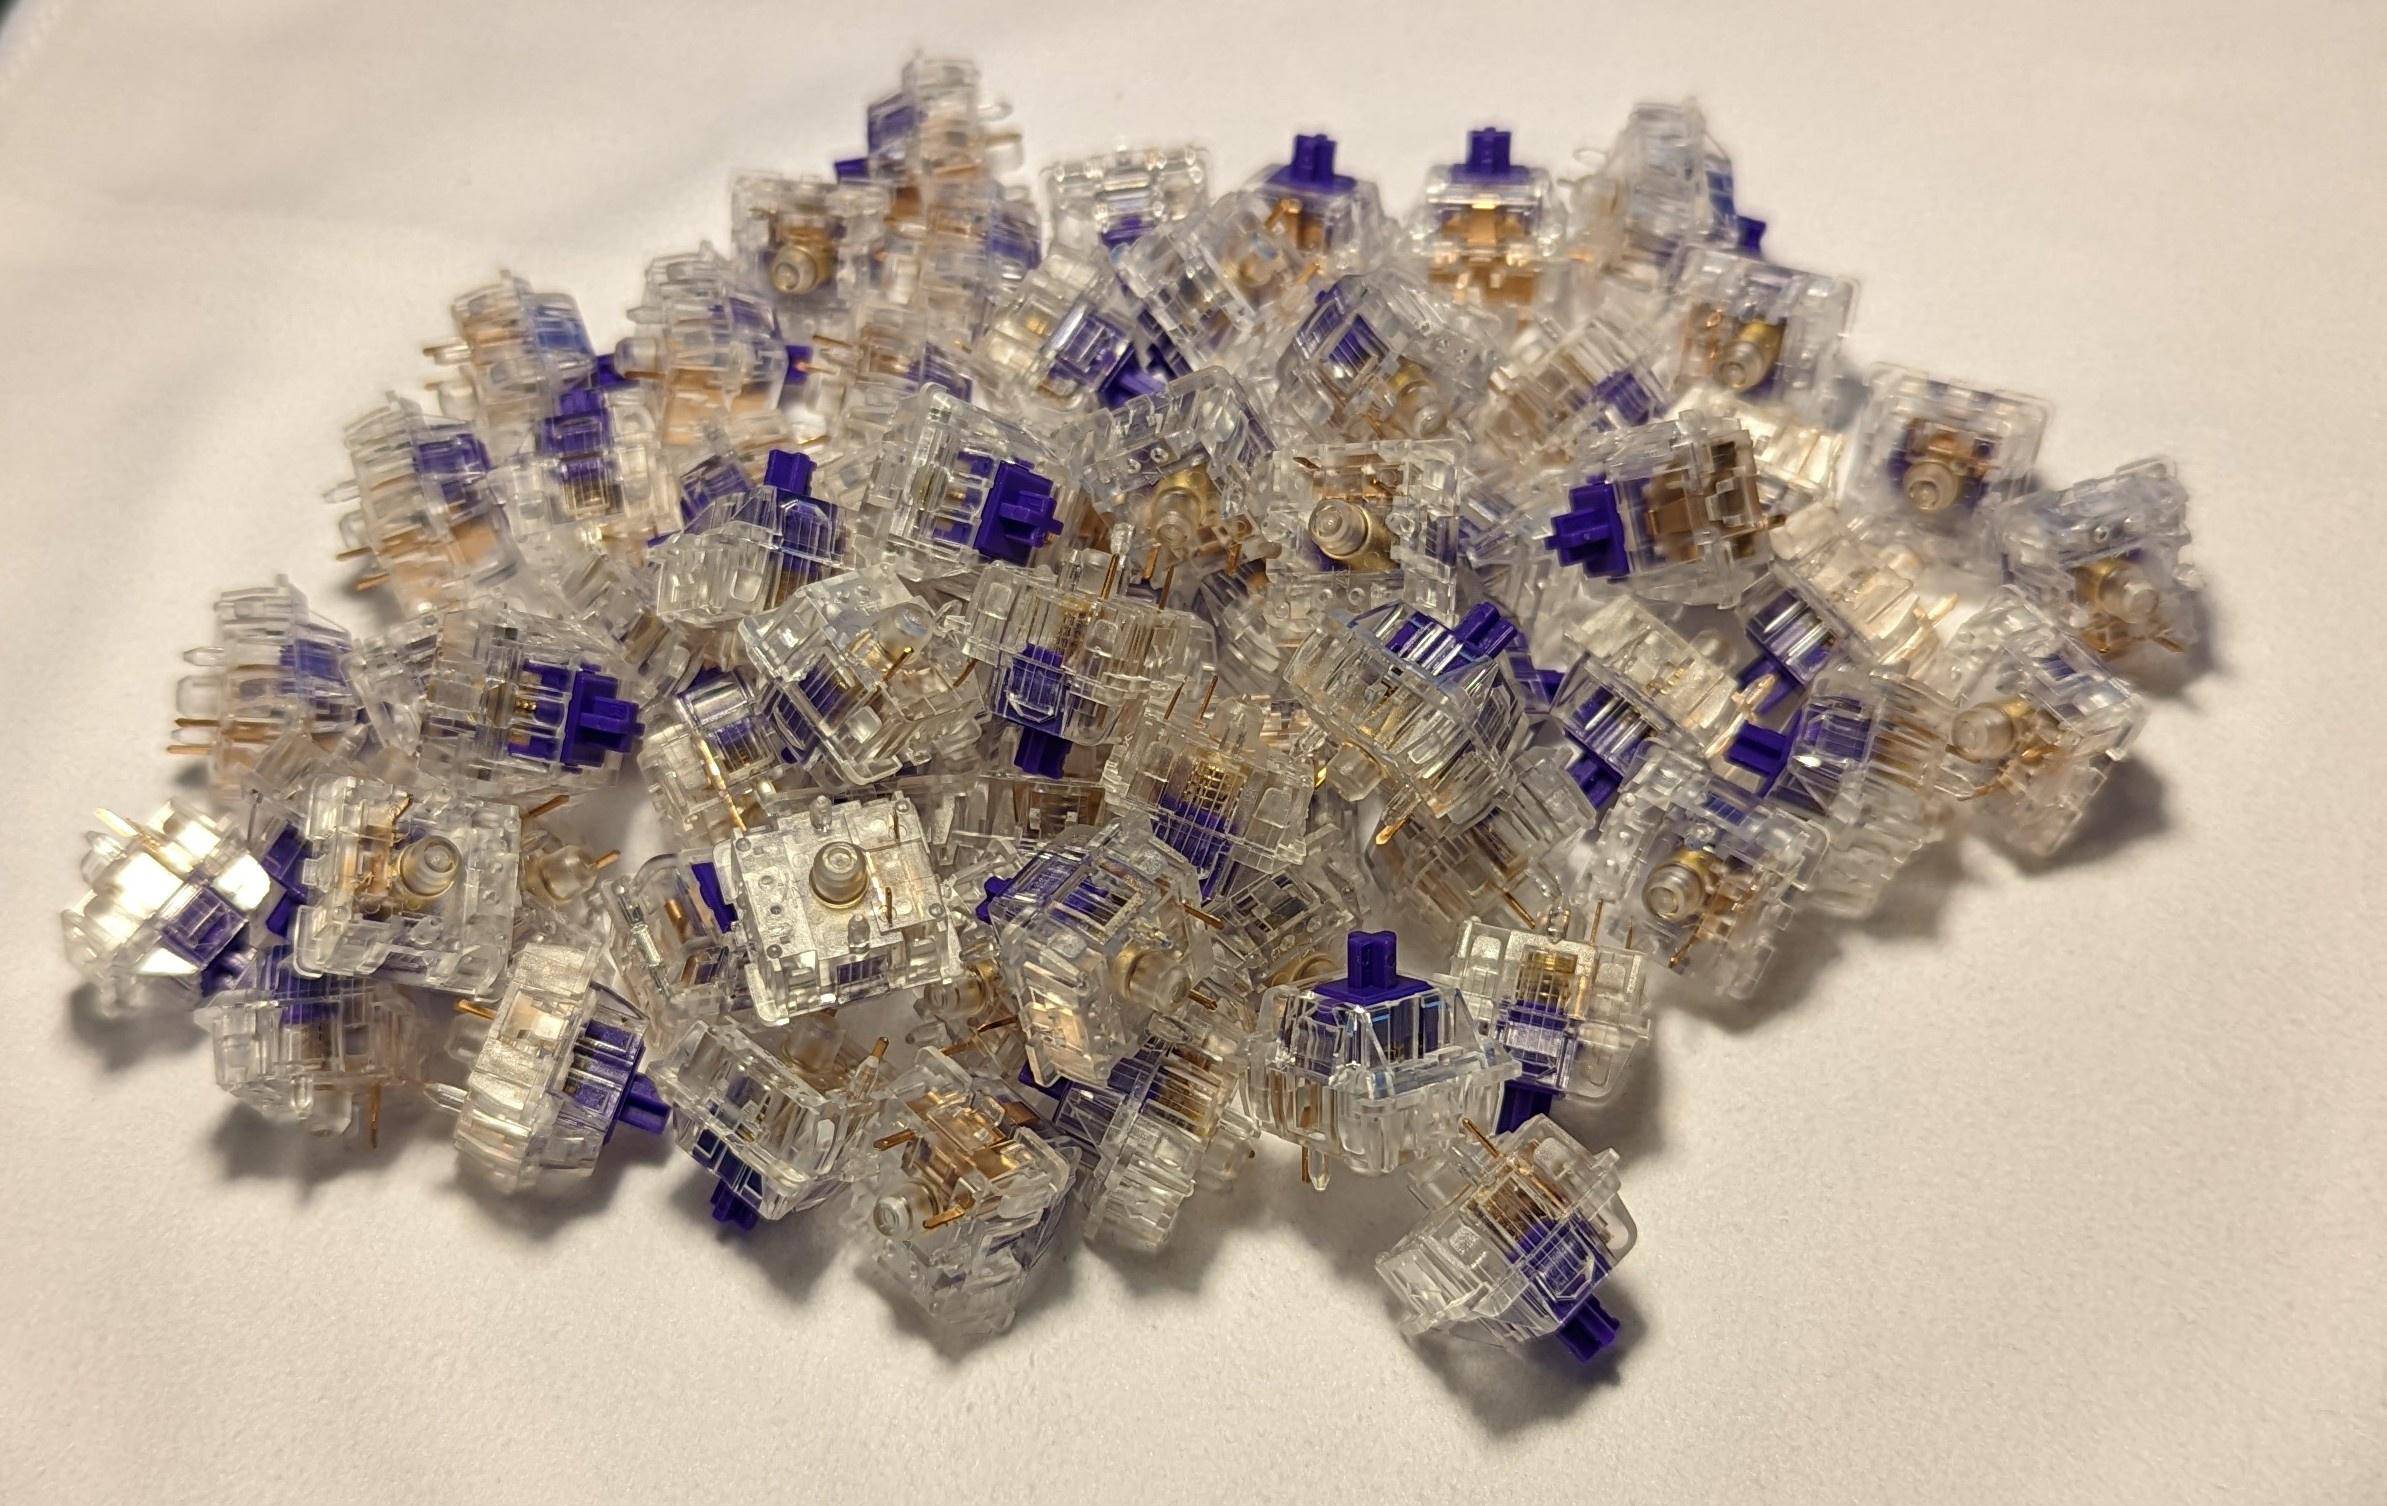 [KFA MARKETPLACE] 70x Lubed Durock Medium Tactile Switches - KeebsForAll